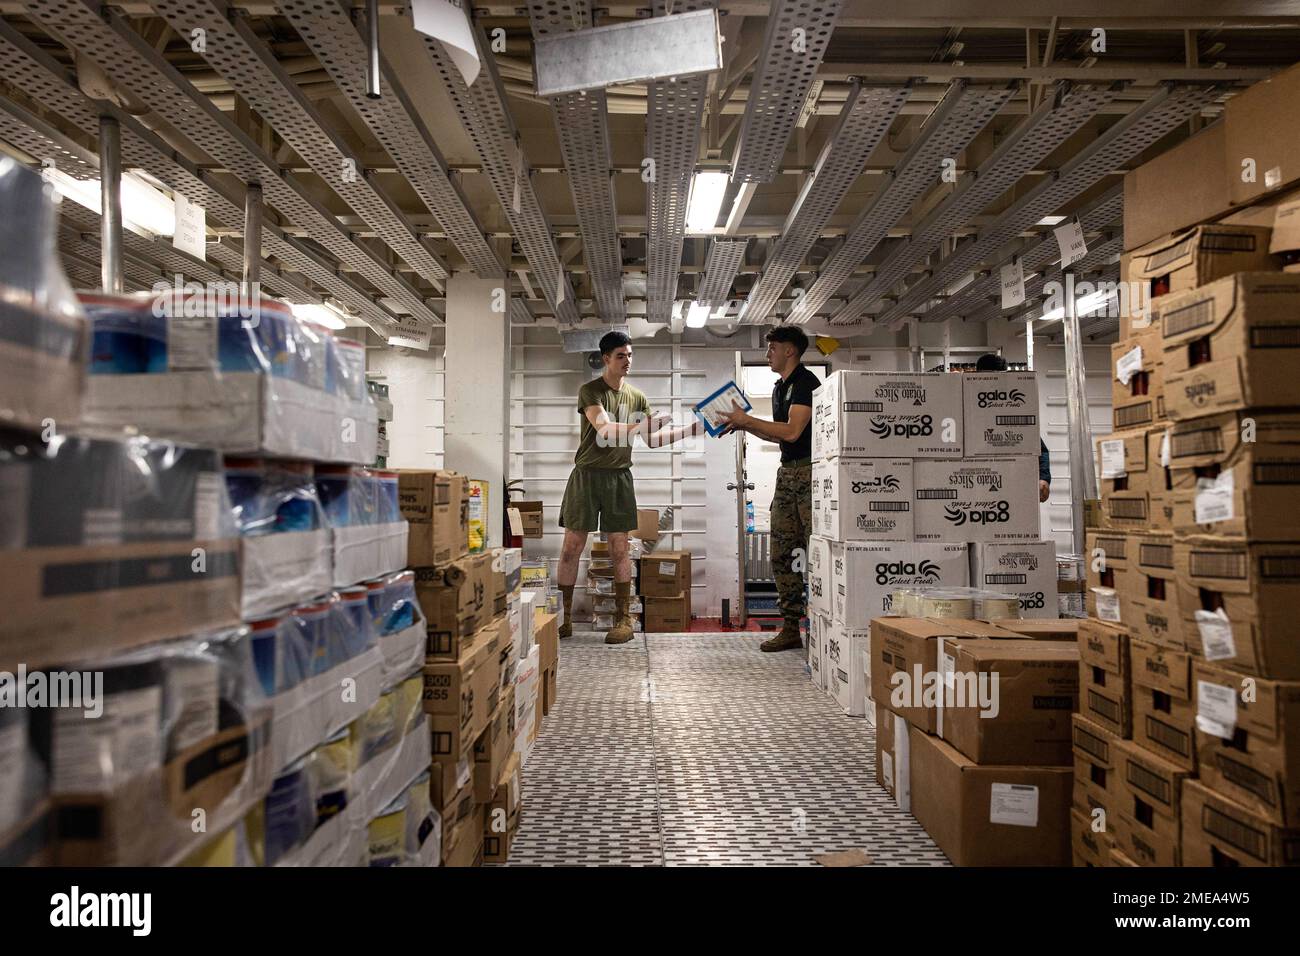 U.S. Marines with Battalion Landing Team 2/5, 31st Marine Expeditionary Unit, pass a box in the store room during a replenishment at sea aboard USS New Orleans (LPD 18) in the Philippine Sea, Aug. 15, 2022. LPD 18 conducted a RAS with USS Carl Brashear (T-AKE 7) to restock on food, supplies and mail. The 31st MEU is operating aboard ships of the Tripoli Amphibious Ready Group in the 7th fleet area of operations to enhance interoperability with allies and partners and serve as a ready response force to defend peace and stability in the Indo-Pacific Region. Stock Photo